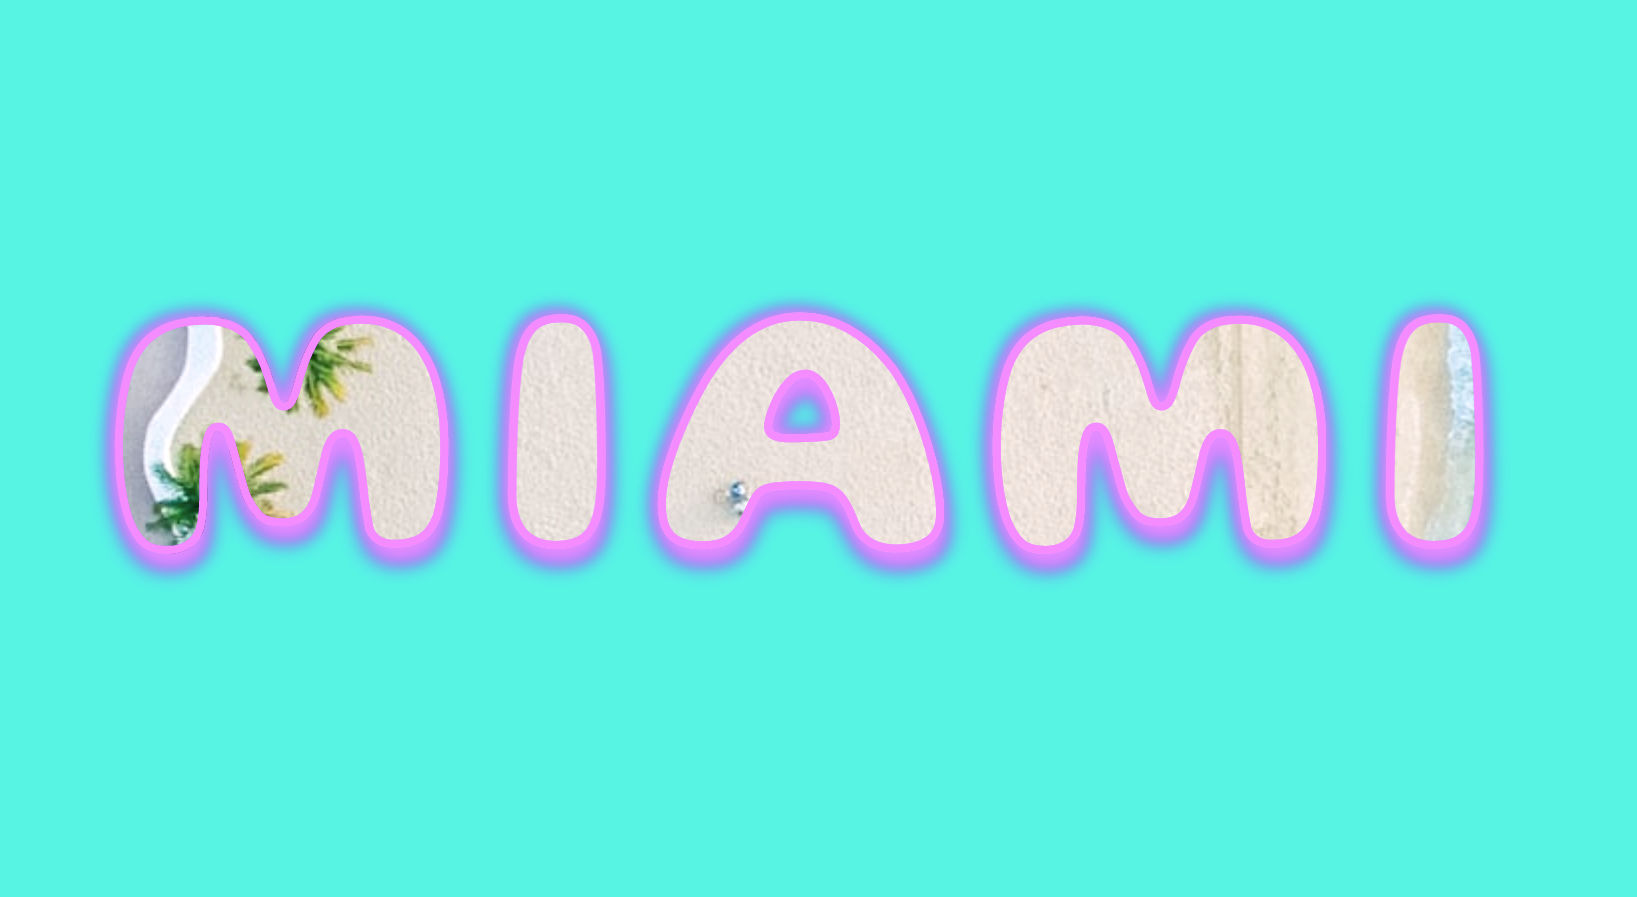 screenshot of miami text example of Bubble text with image background